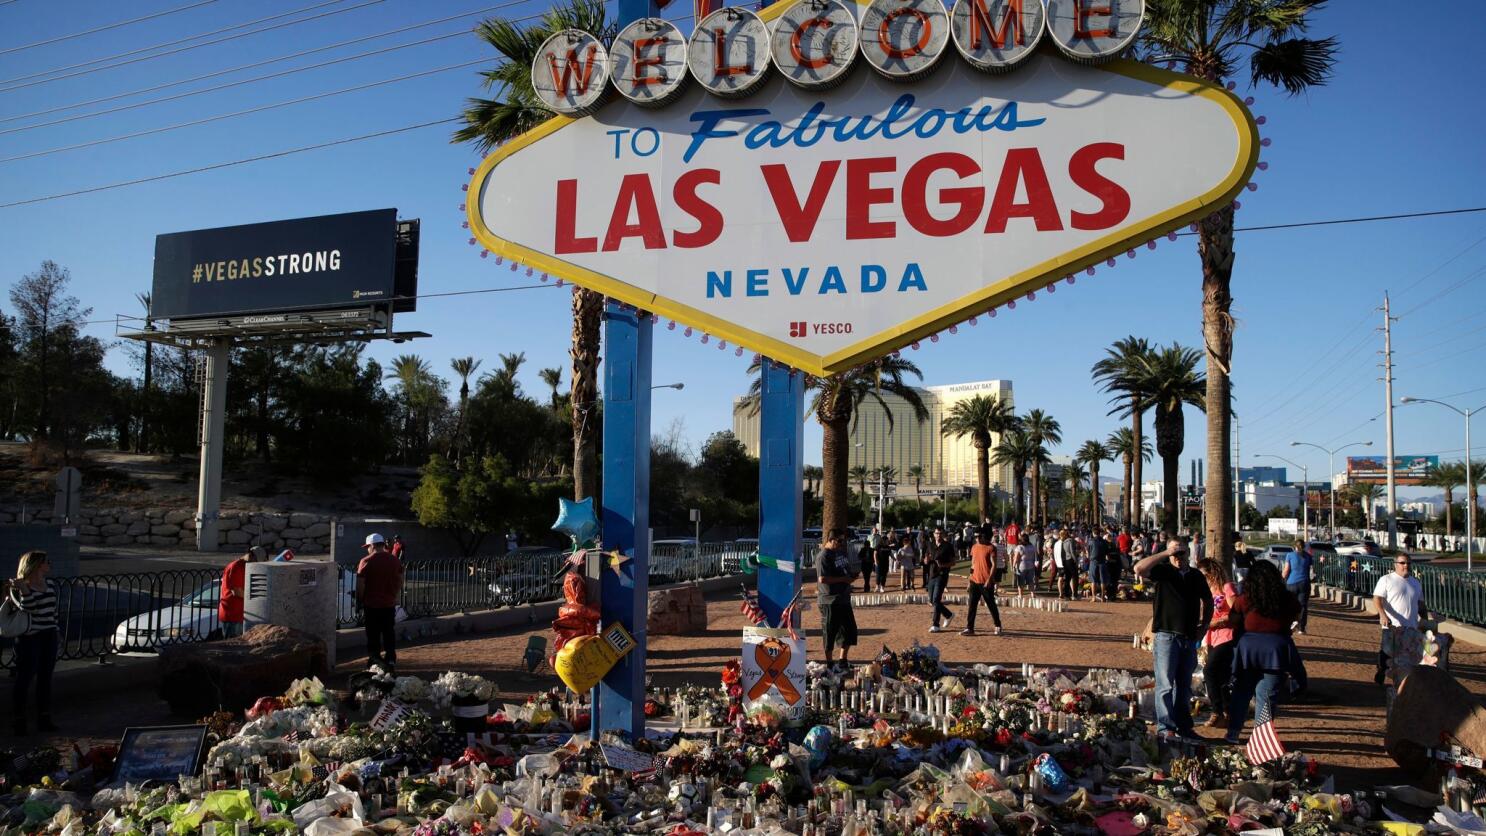 Las Vegas revels in near record numbers as tourists flock back